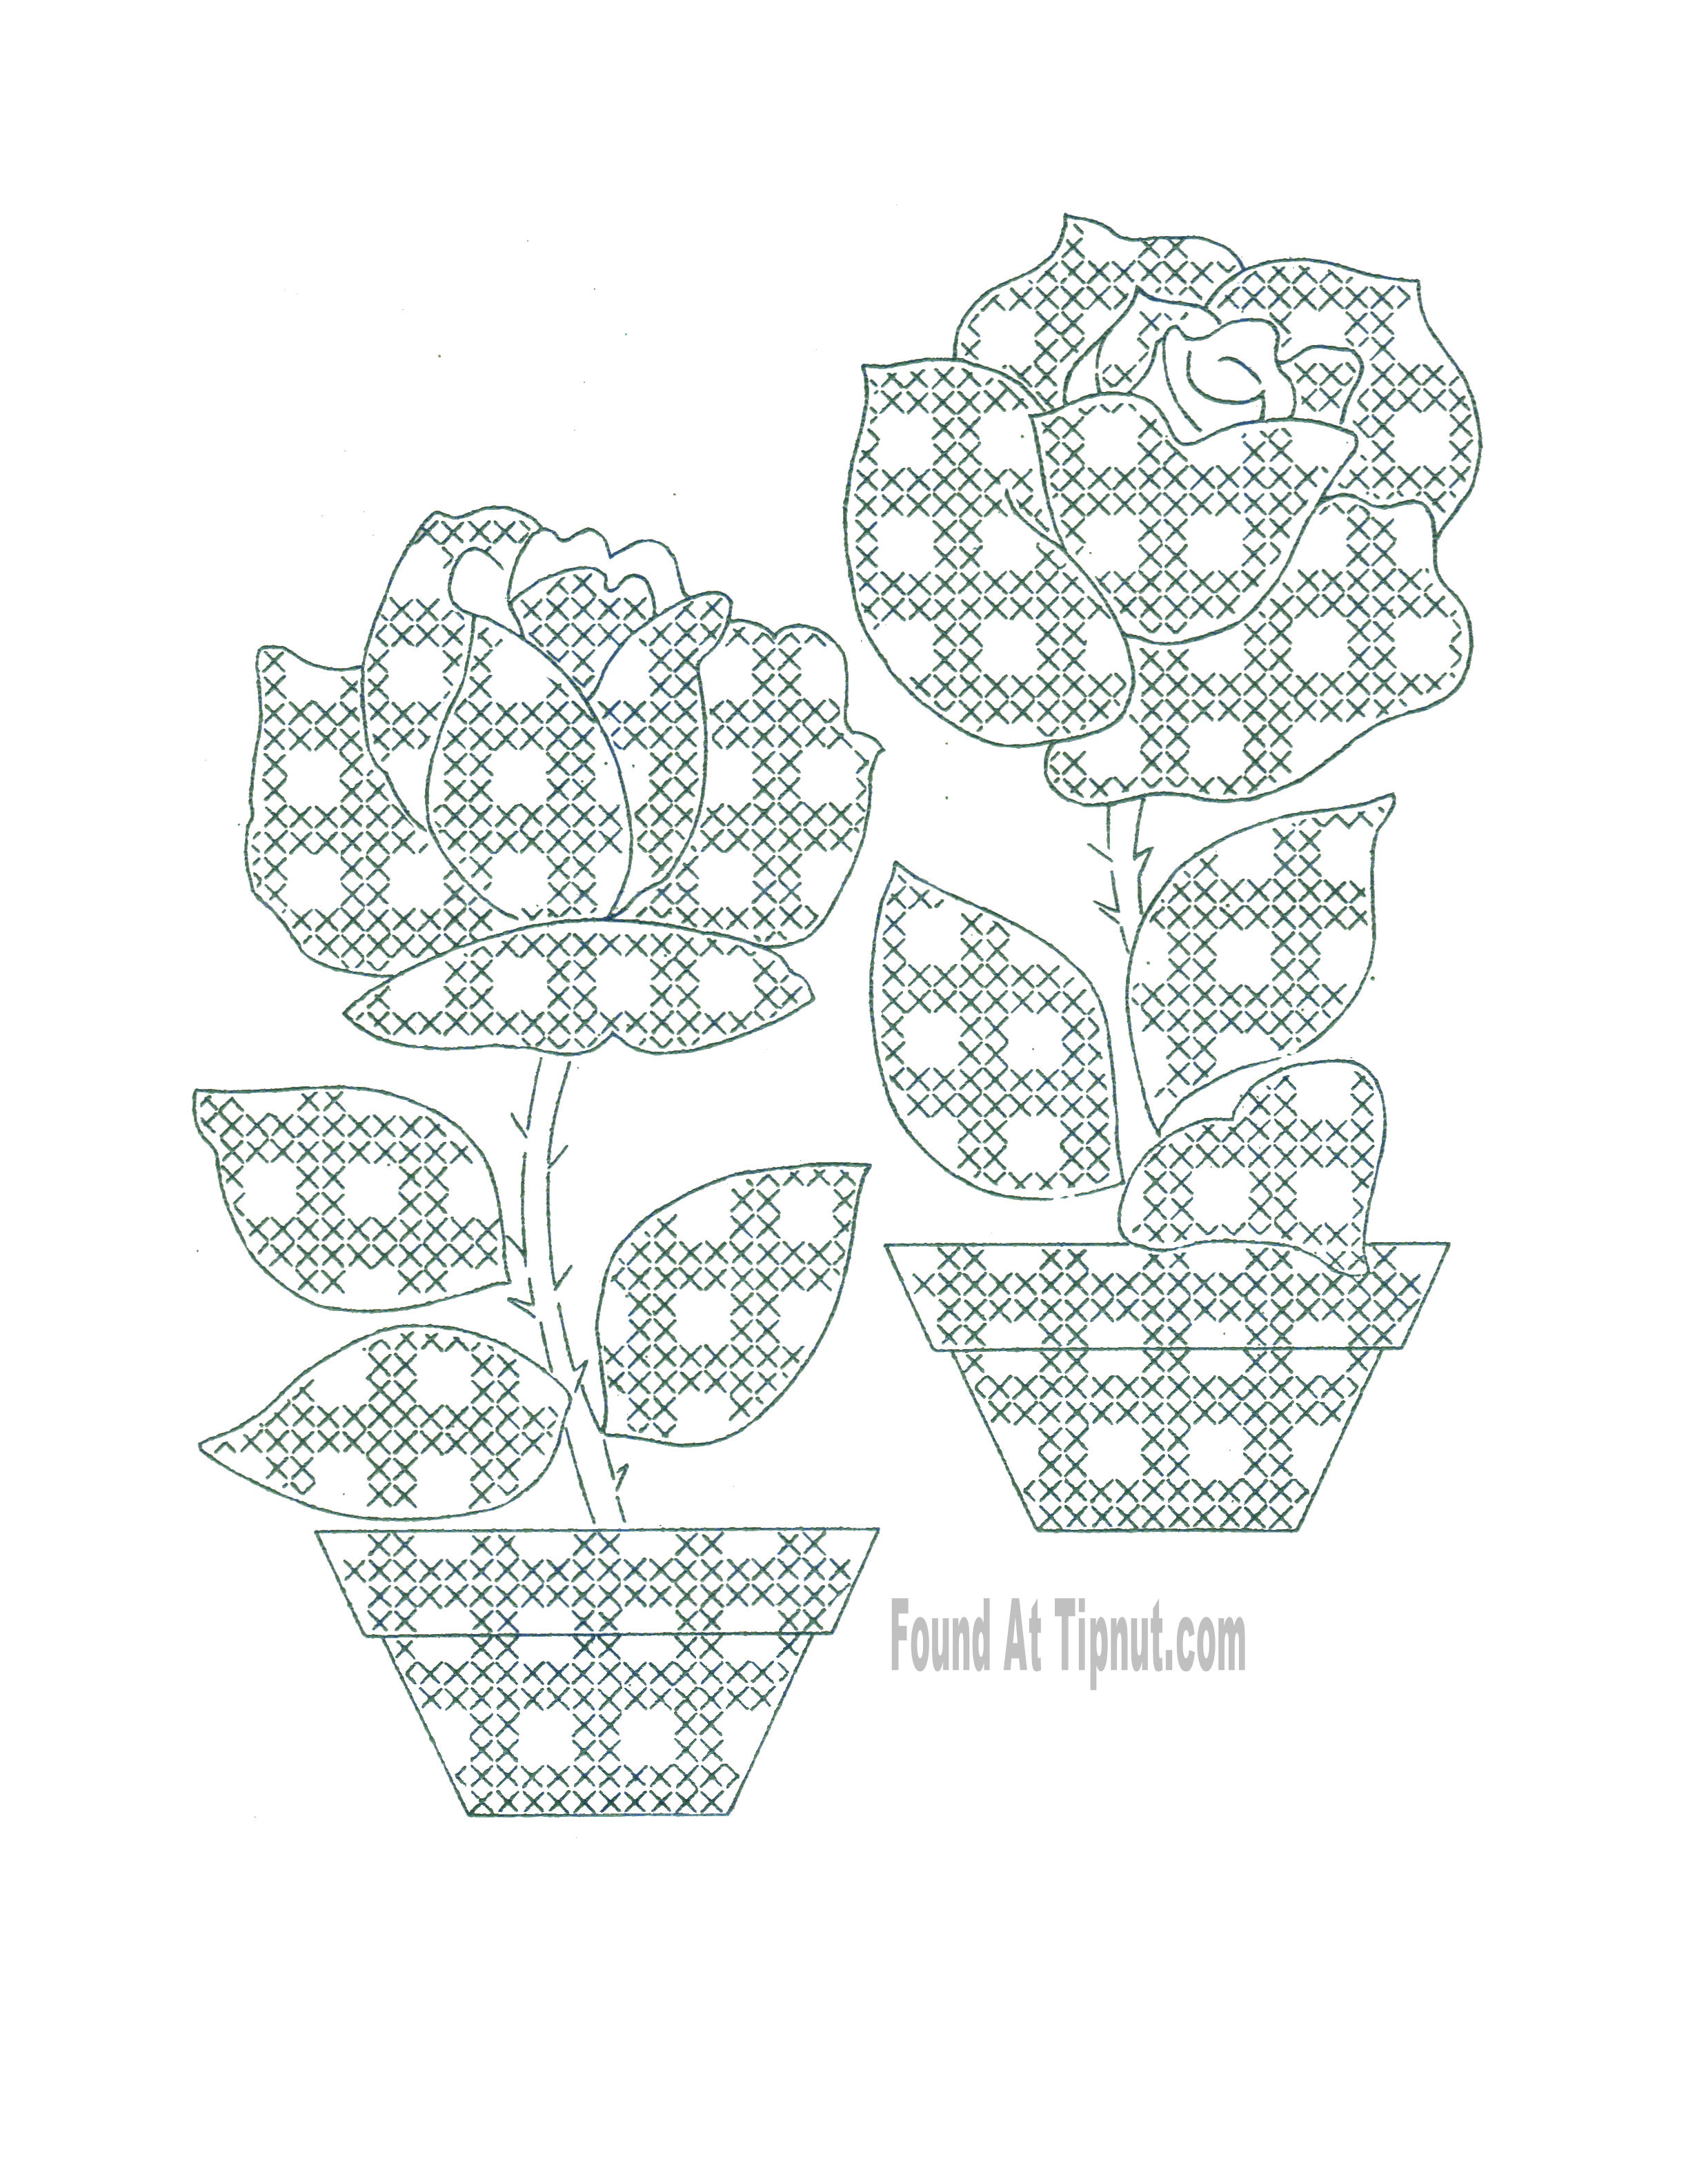 Gingham Embroidery Patterns Gingham Flowers Pattern Set Cross Stitch Embroidery Tipnut